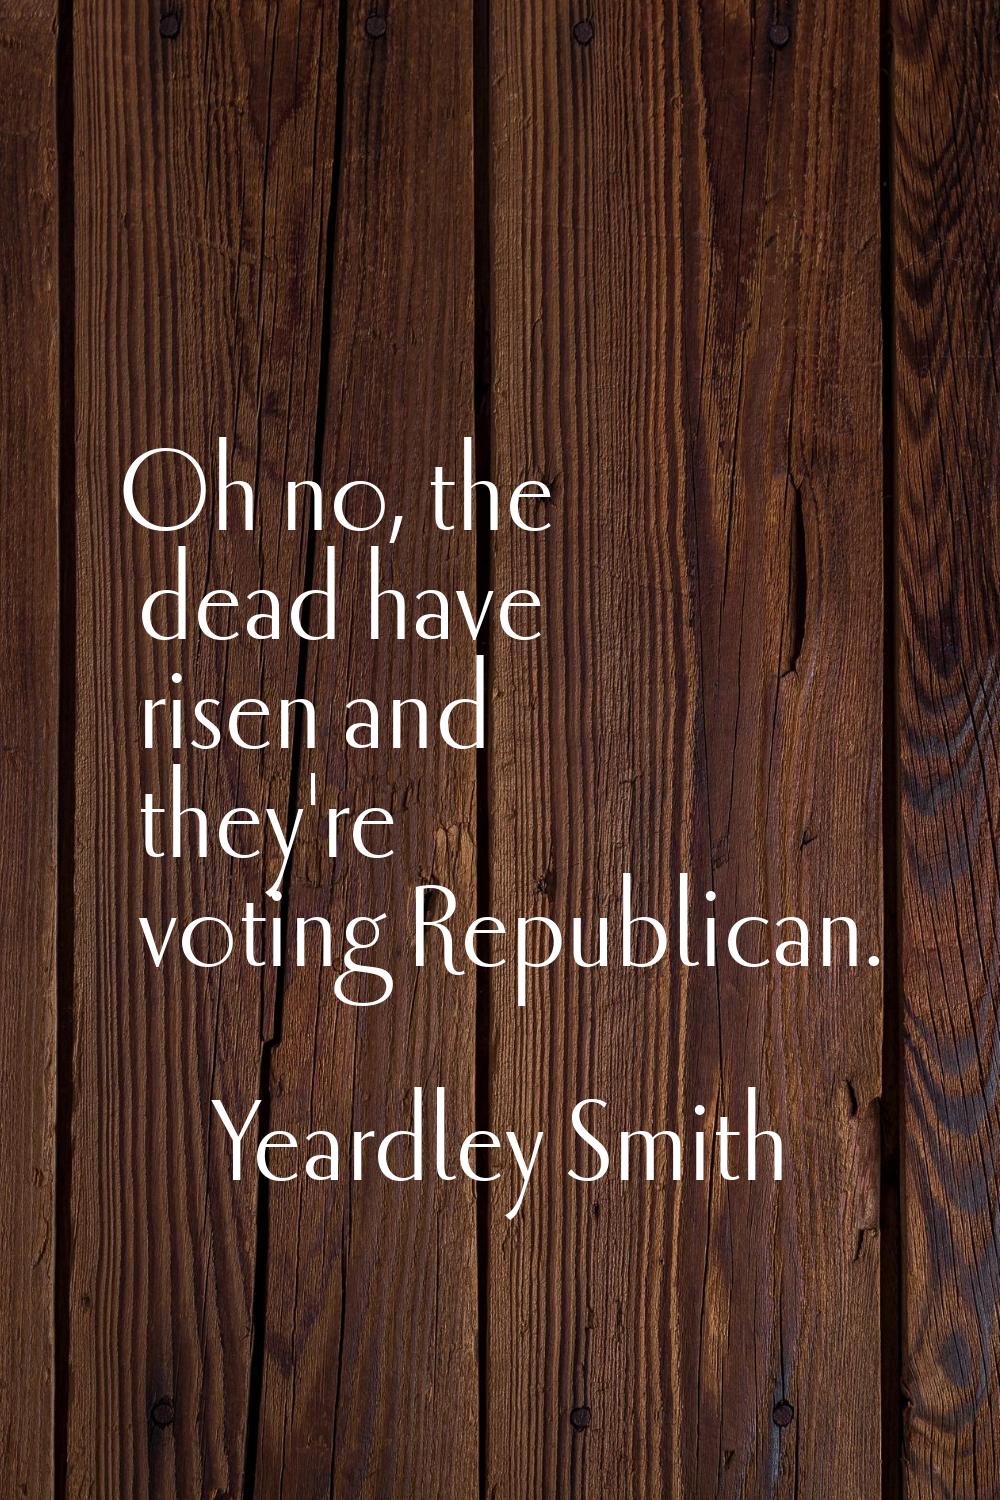 Oh no, the dead have risen and they're voting Republican.